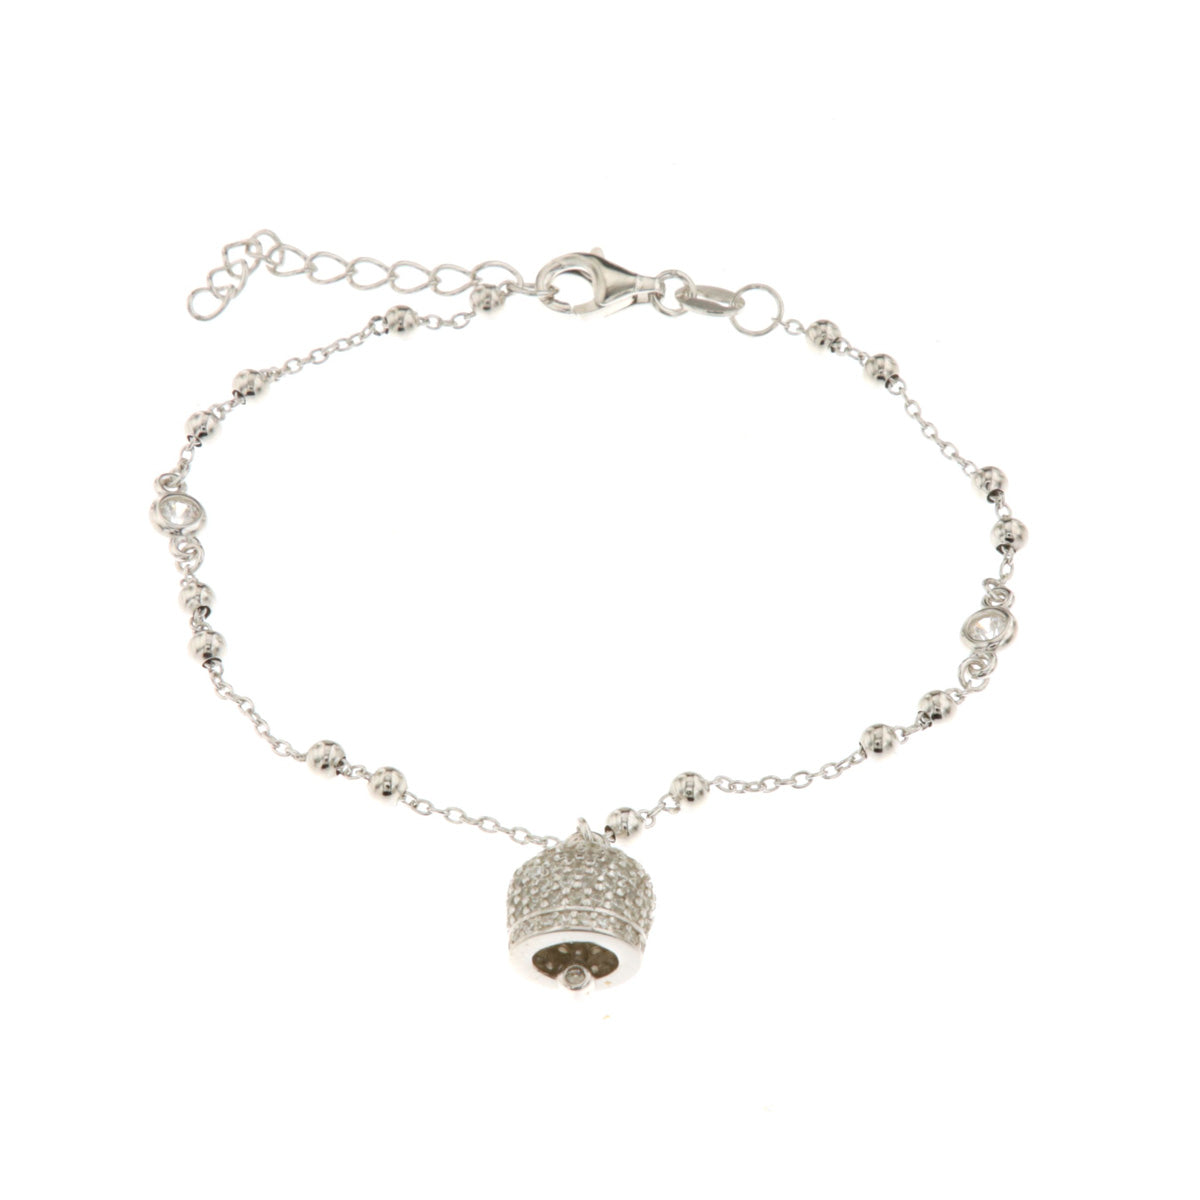 925 silver bracelet in white crystals and charming bell pendant stormed by white zirconi